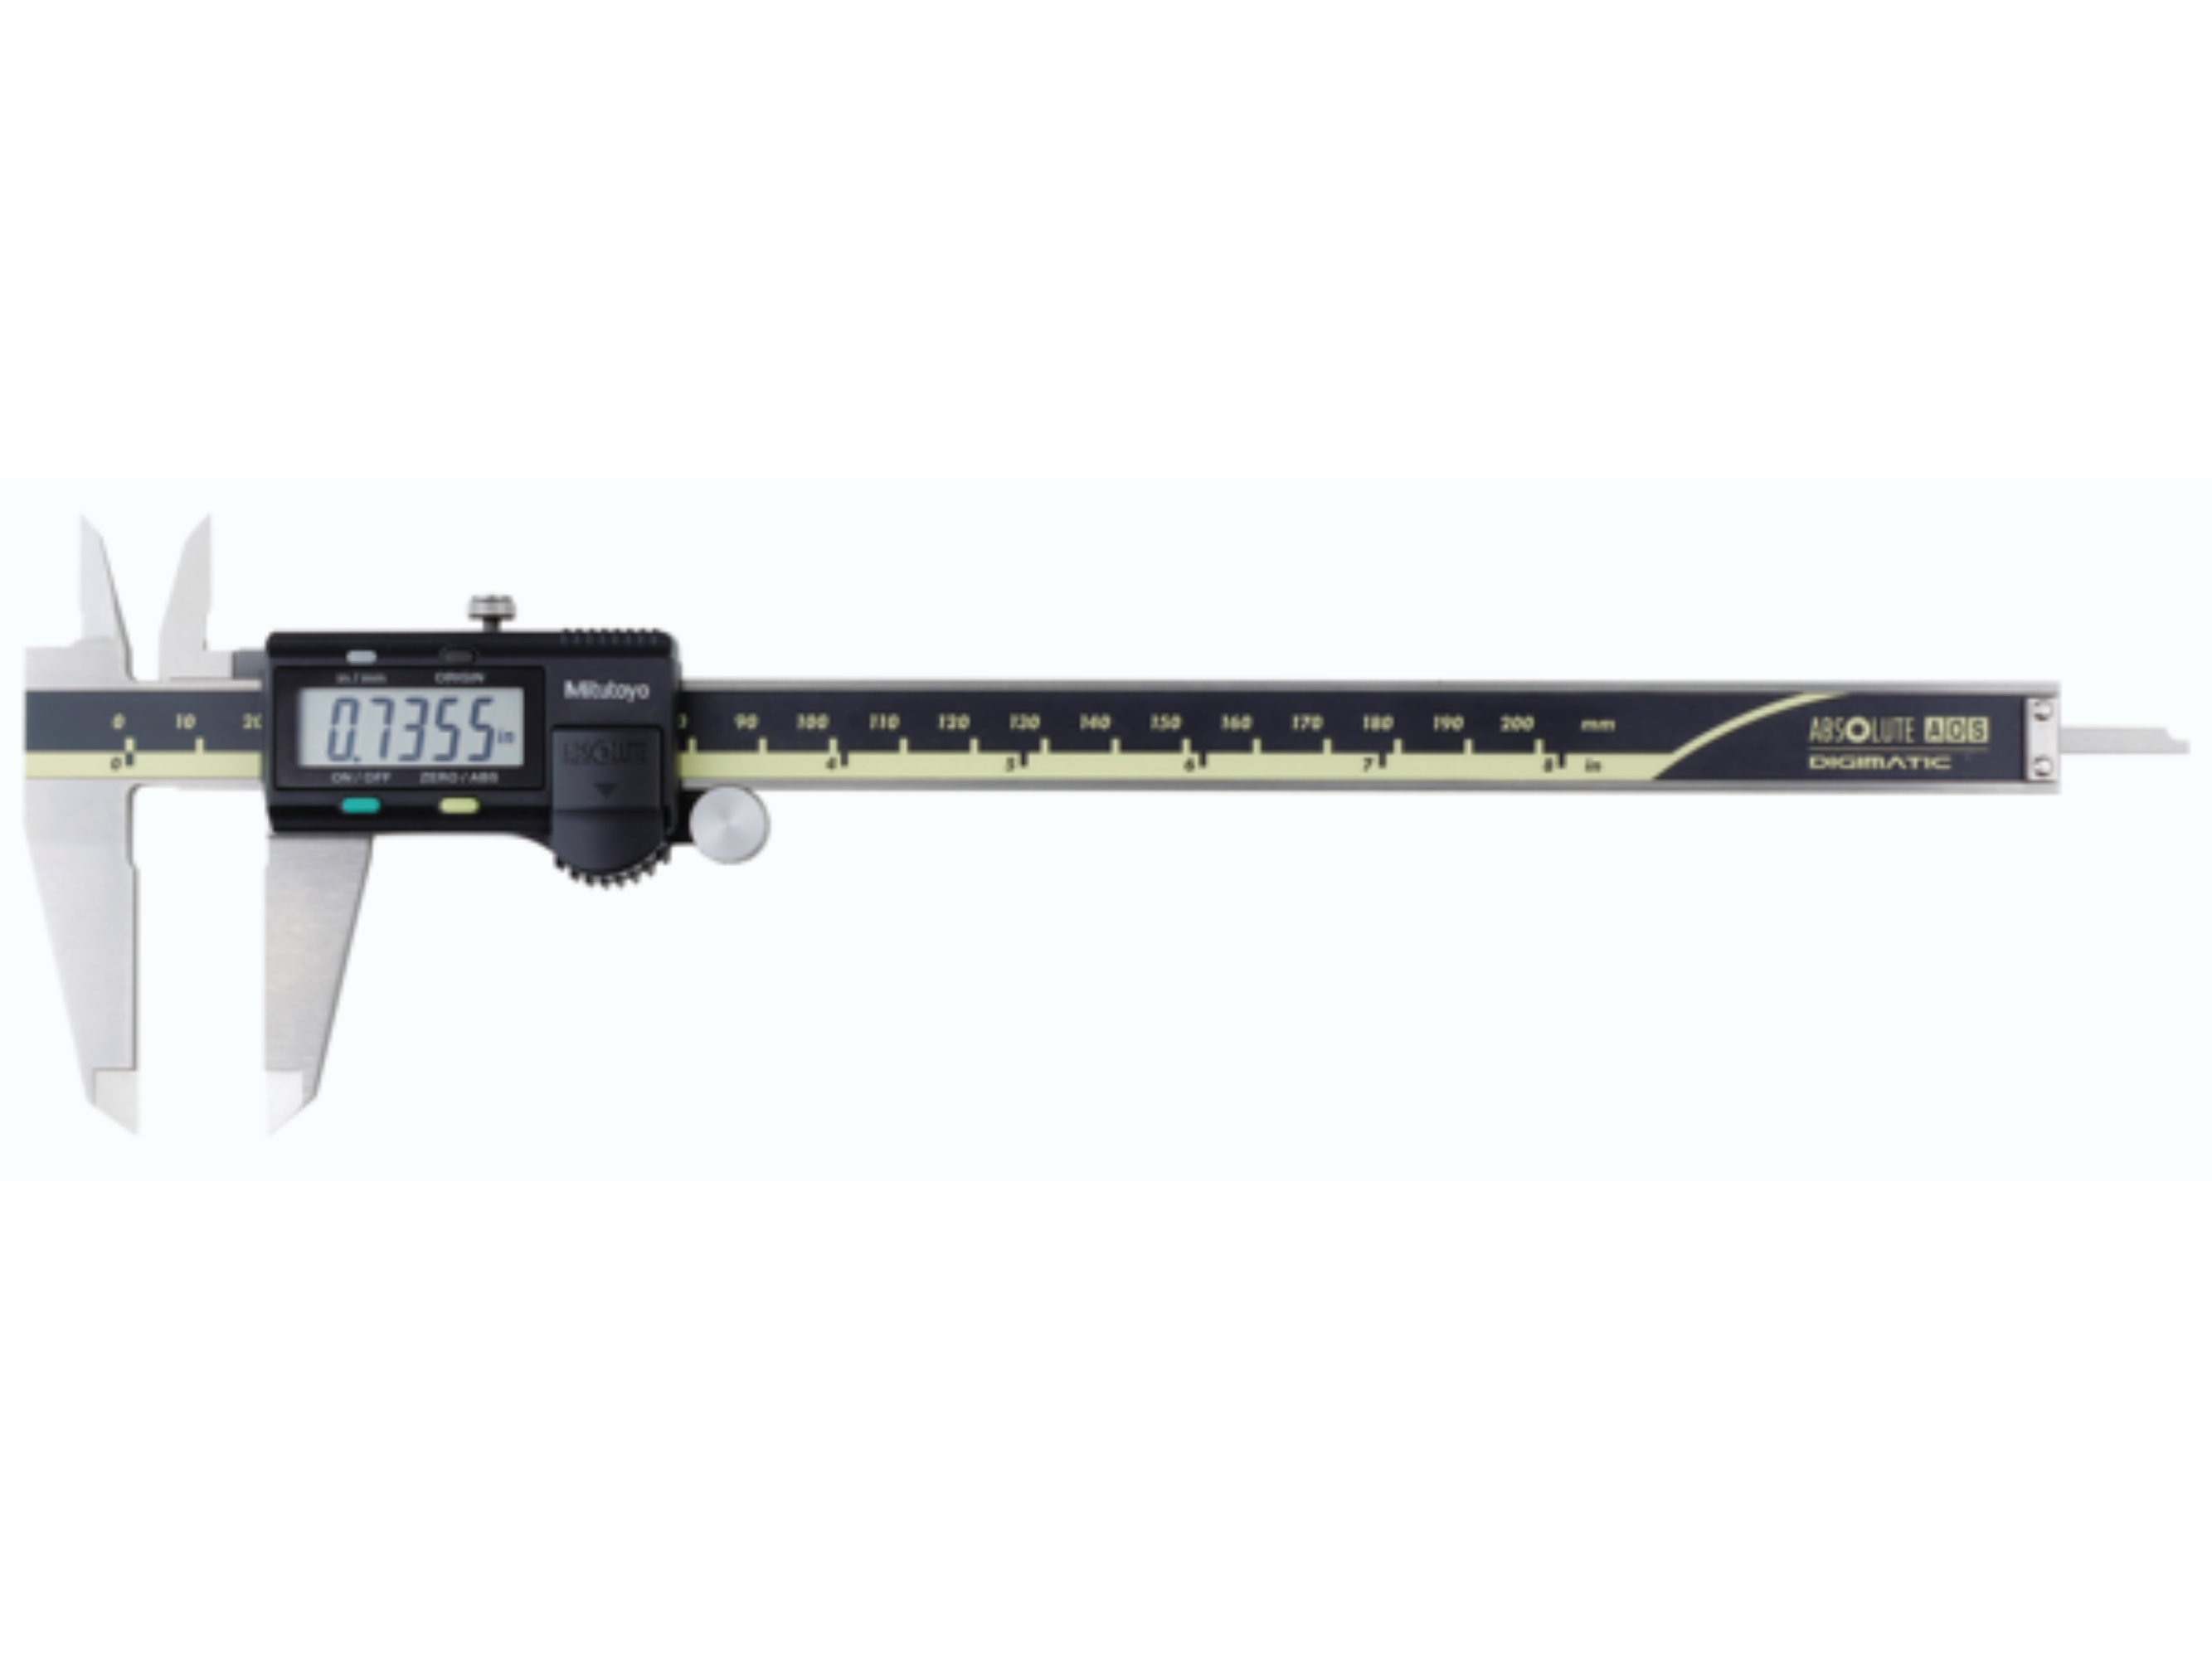 ABSOLUTE AOS Calipers 0-200mm Square Depth Rod & Thumb Roller 500-172-30